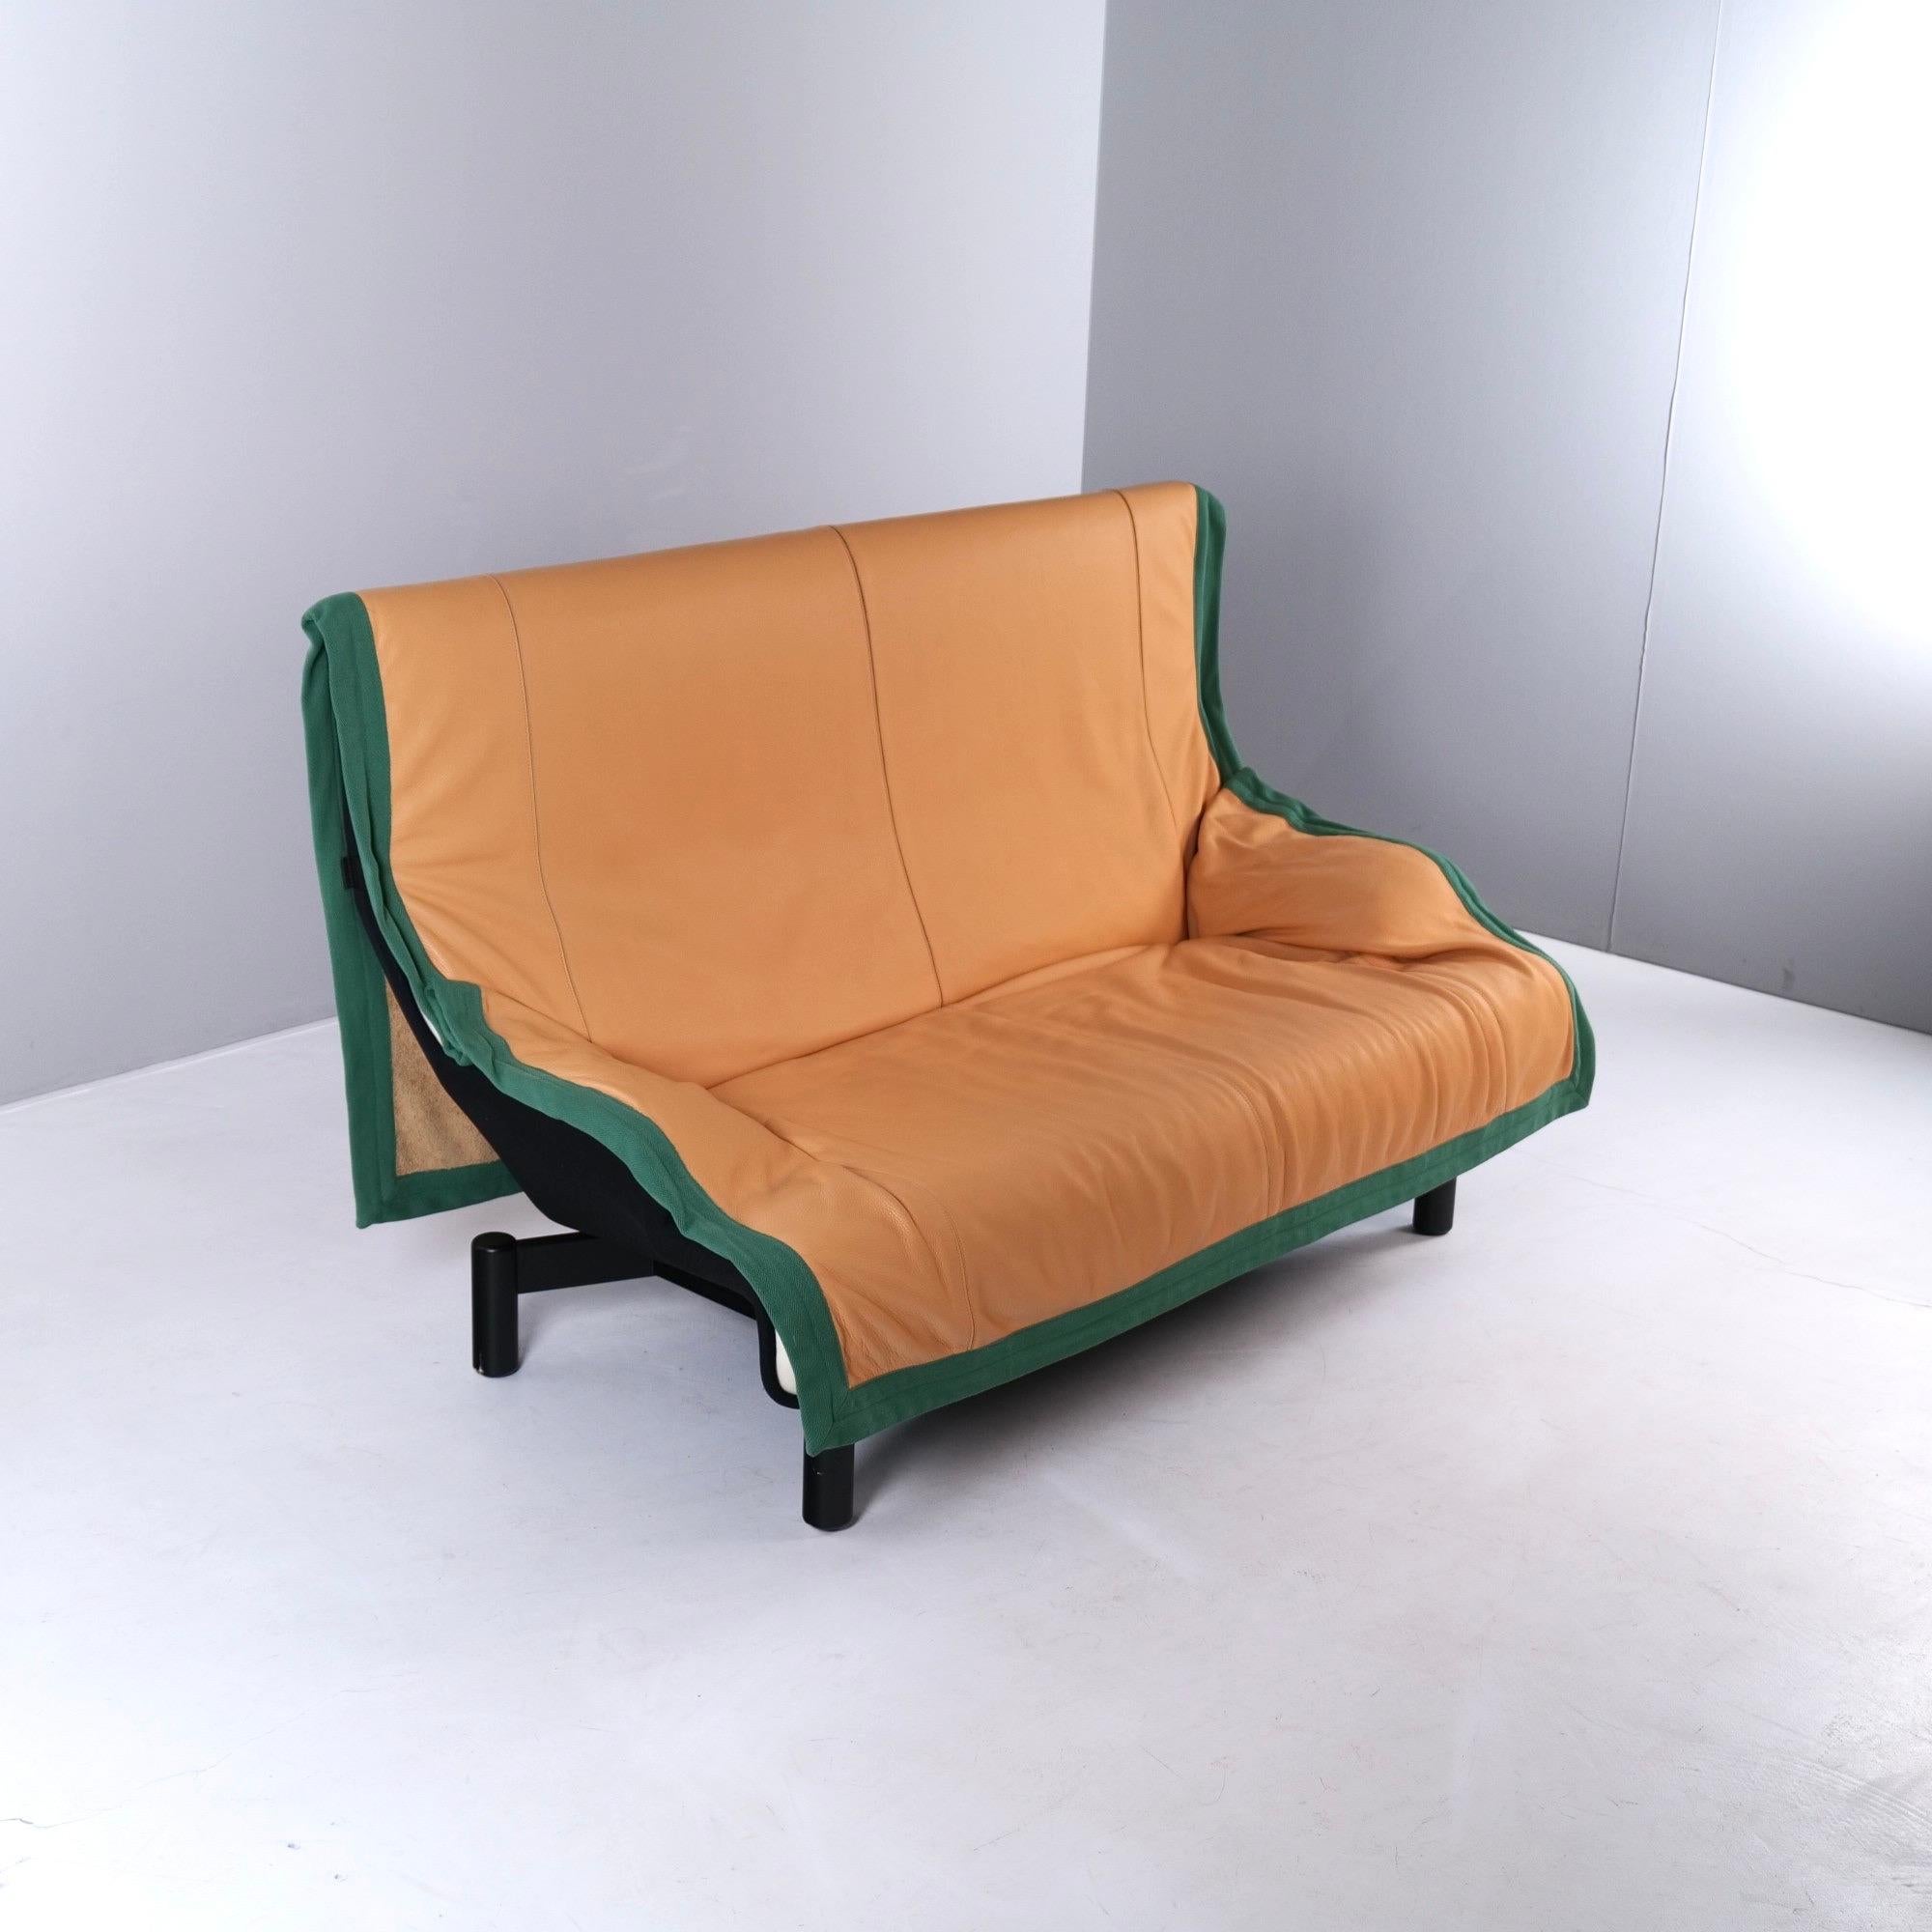 The sofa mod. Sinbad by Vico Magistretti has a throw blanket in leather that extends far over the backrest .
Base in black lacquered wood.
In all the sofa is in excellent condition.
This was one of the sofas that Vico Magistretti appreciated the